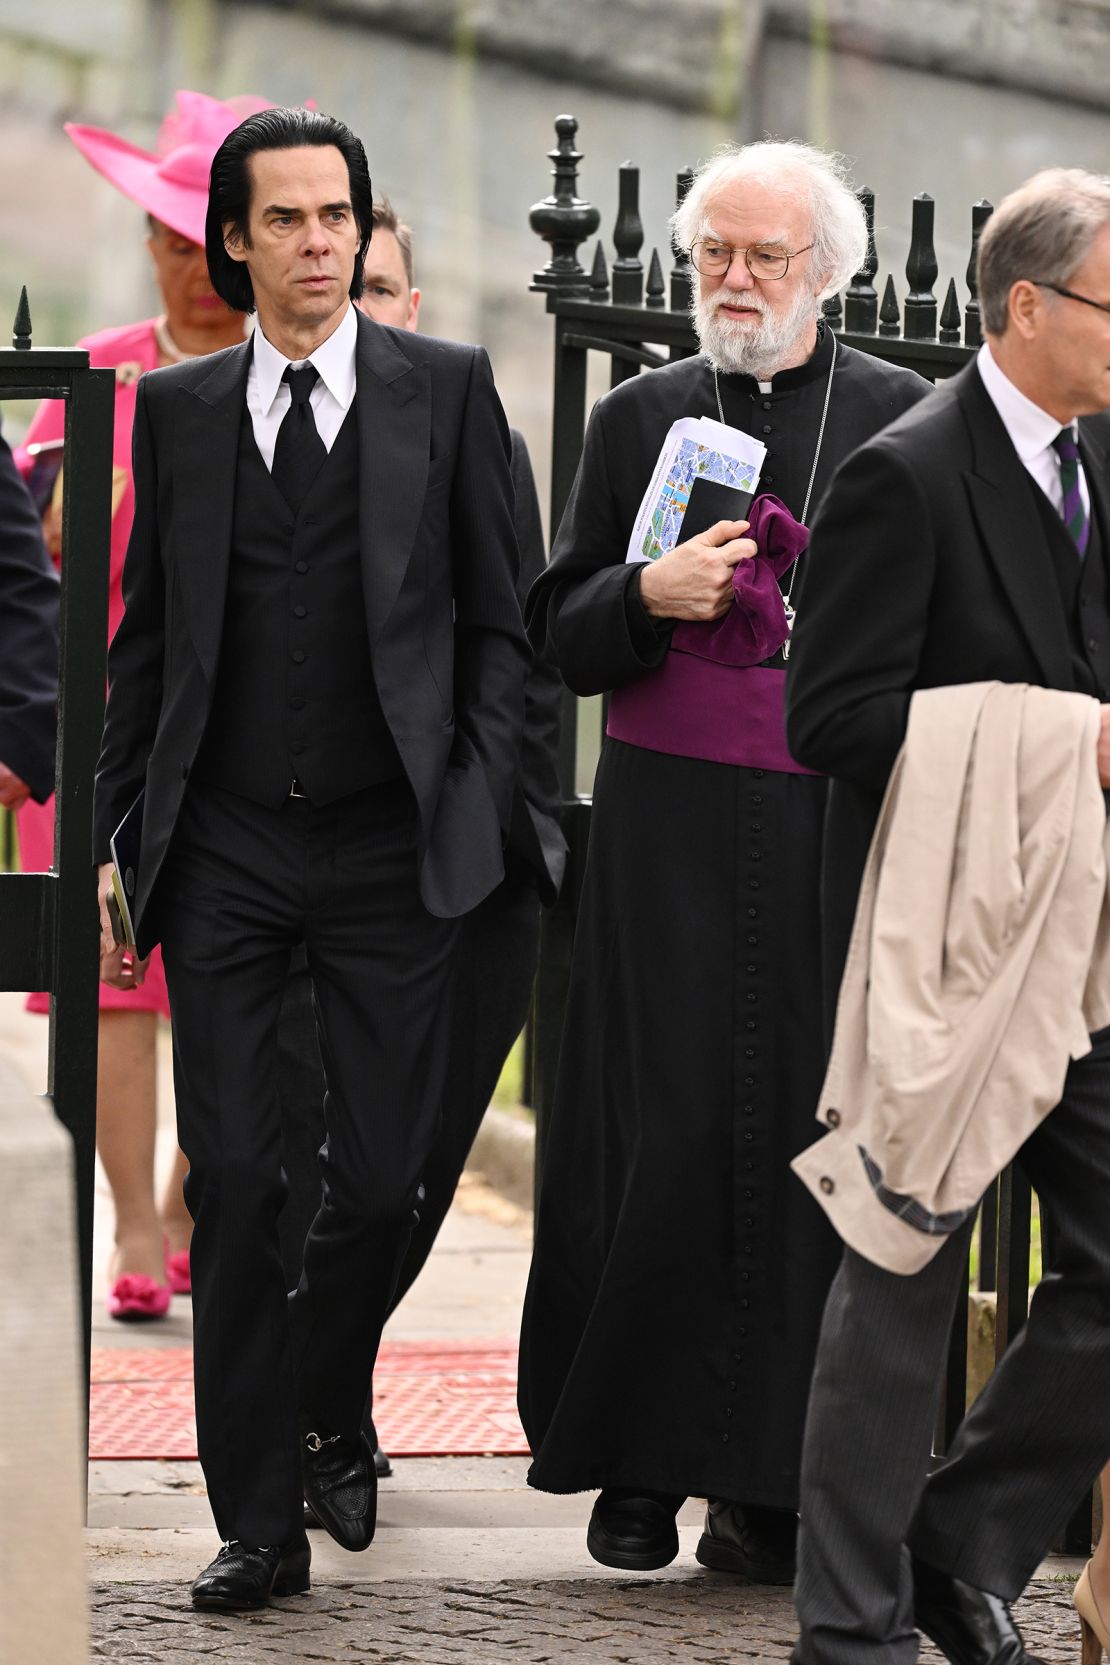 Nick Cave and Rowan Williams spotted at the coronation of King Charles III and Queen Camilla.